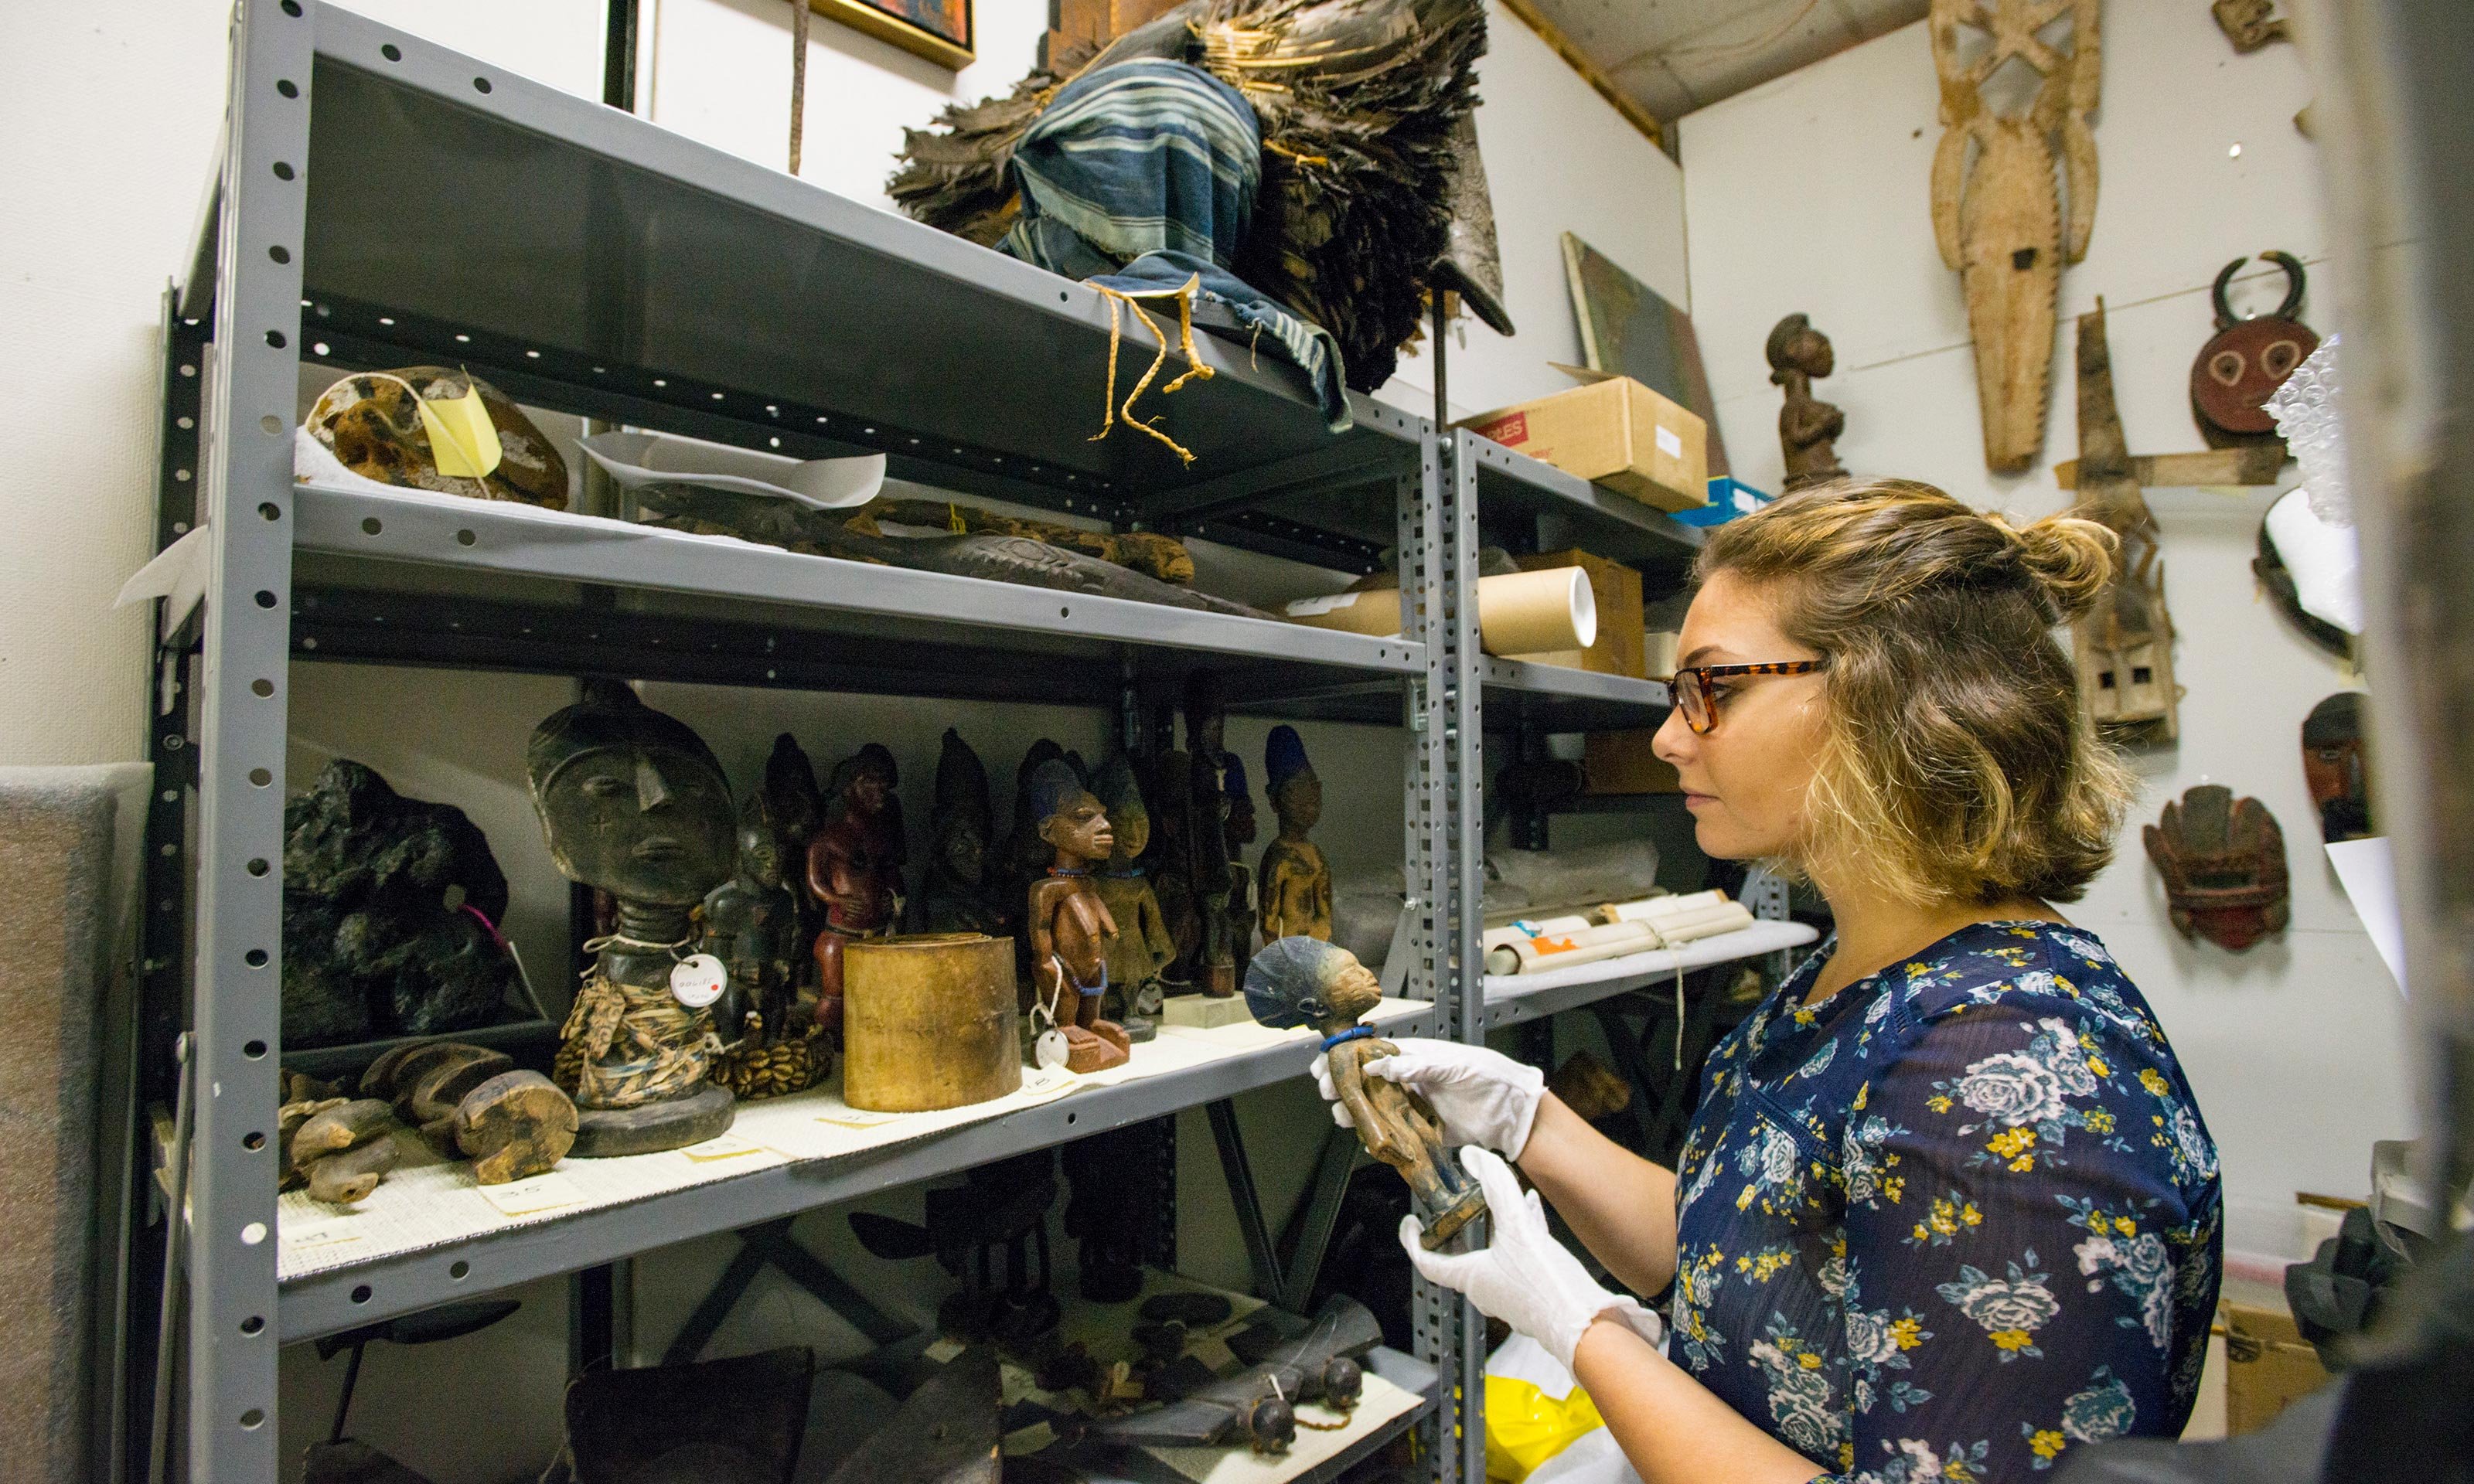 Oakland University student Sarah Lawrence handles African sculptures in the back storage space of the Oakland University Art Gallery